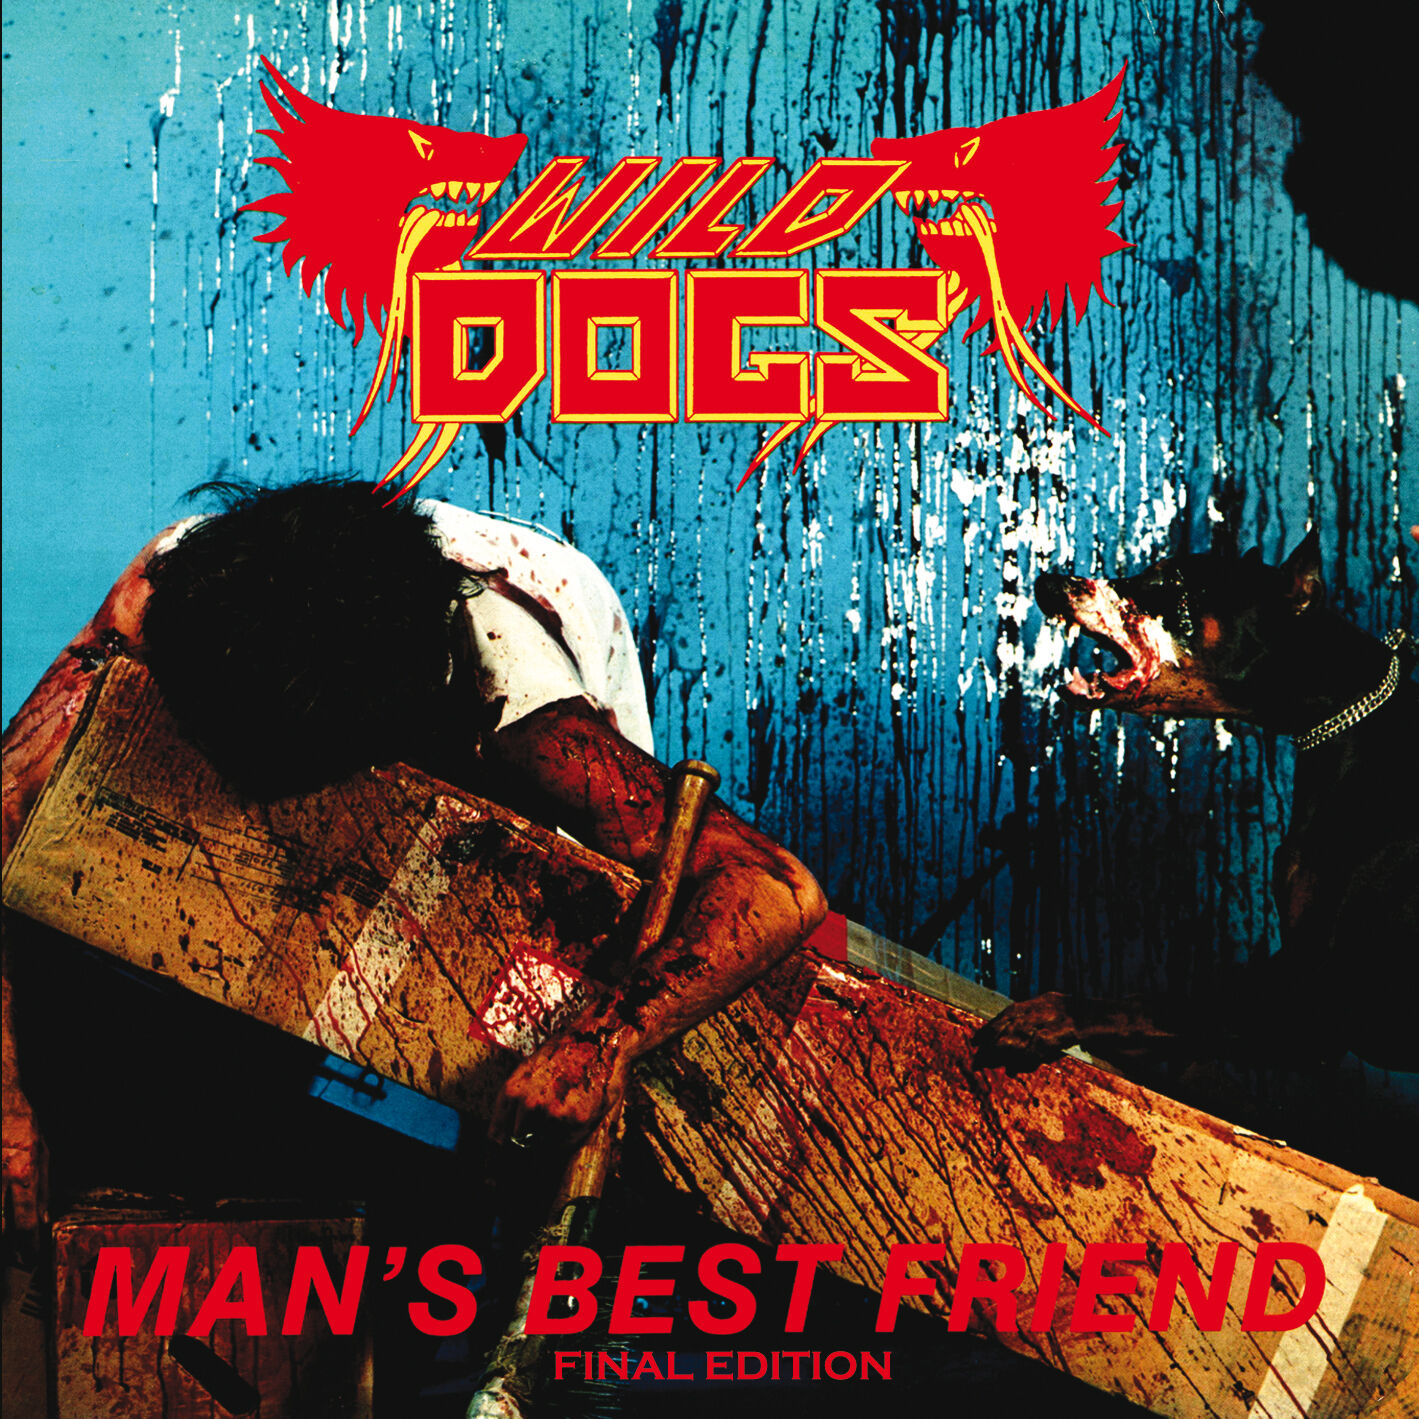 WILD DOGS  MAN'S BEST FRIEND  FINAL  EDITION CD PLUS 7 extra songs